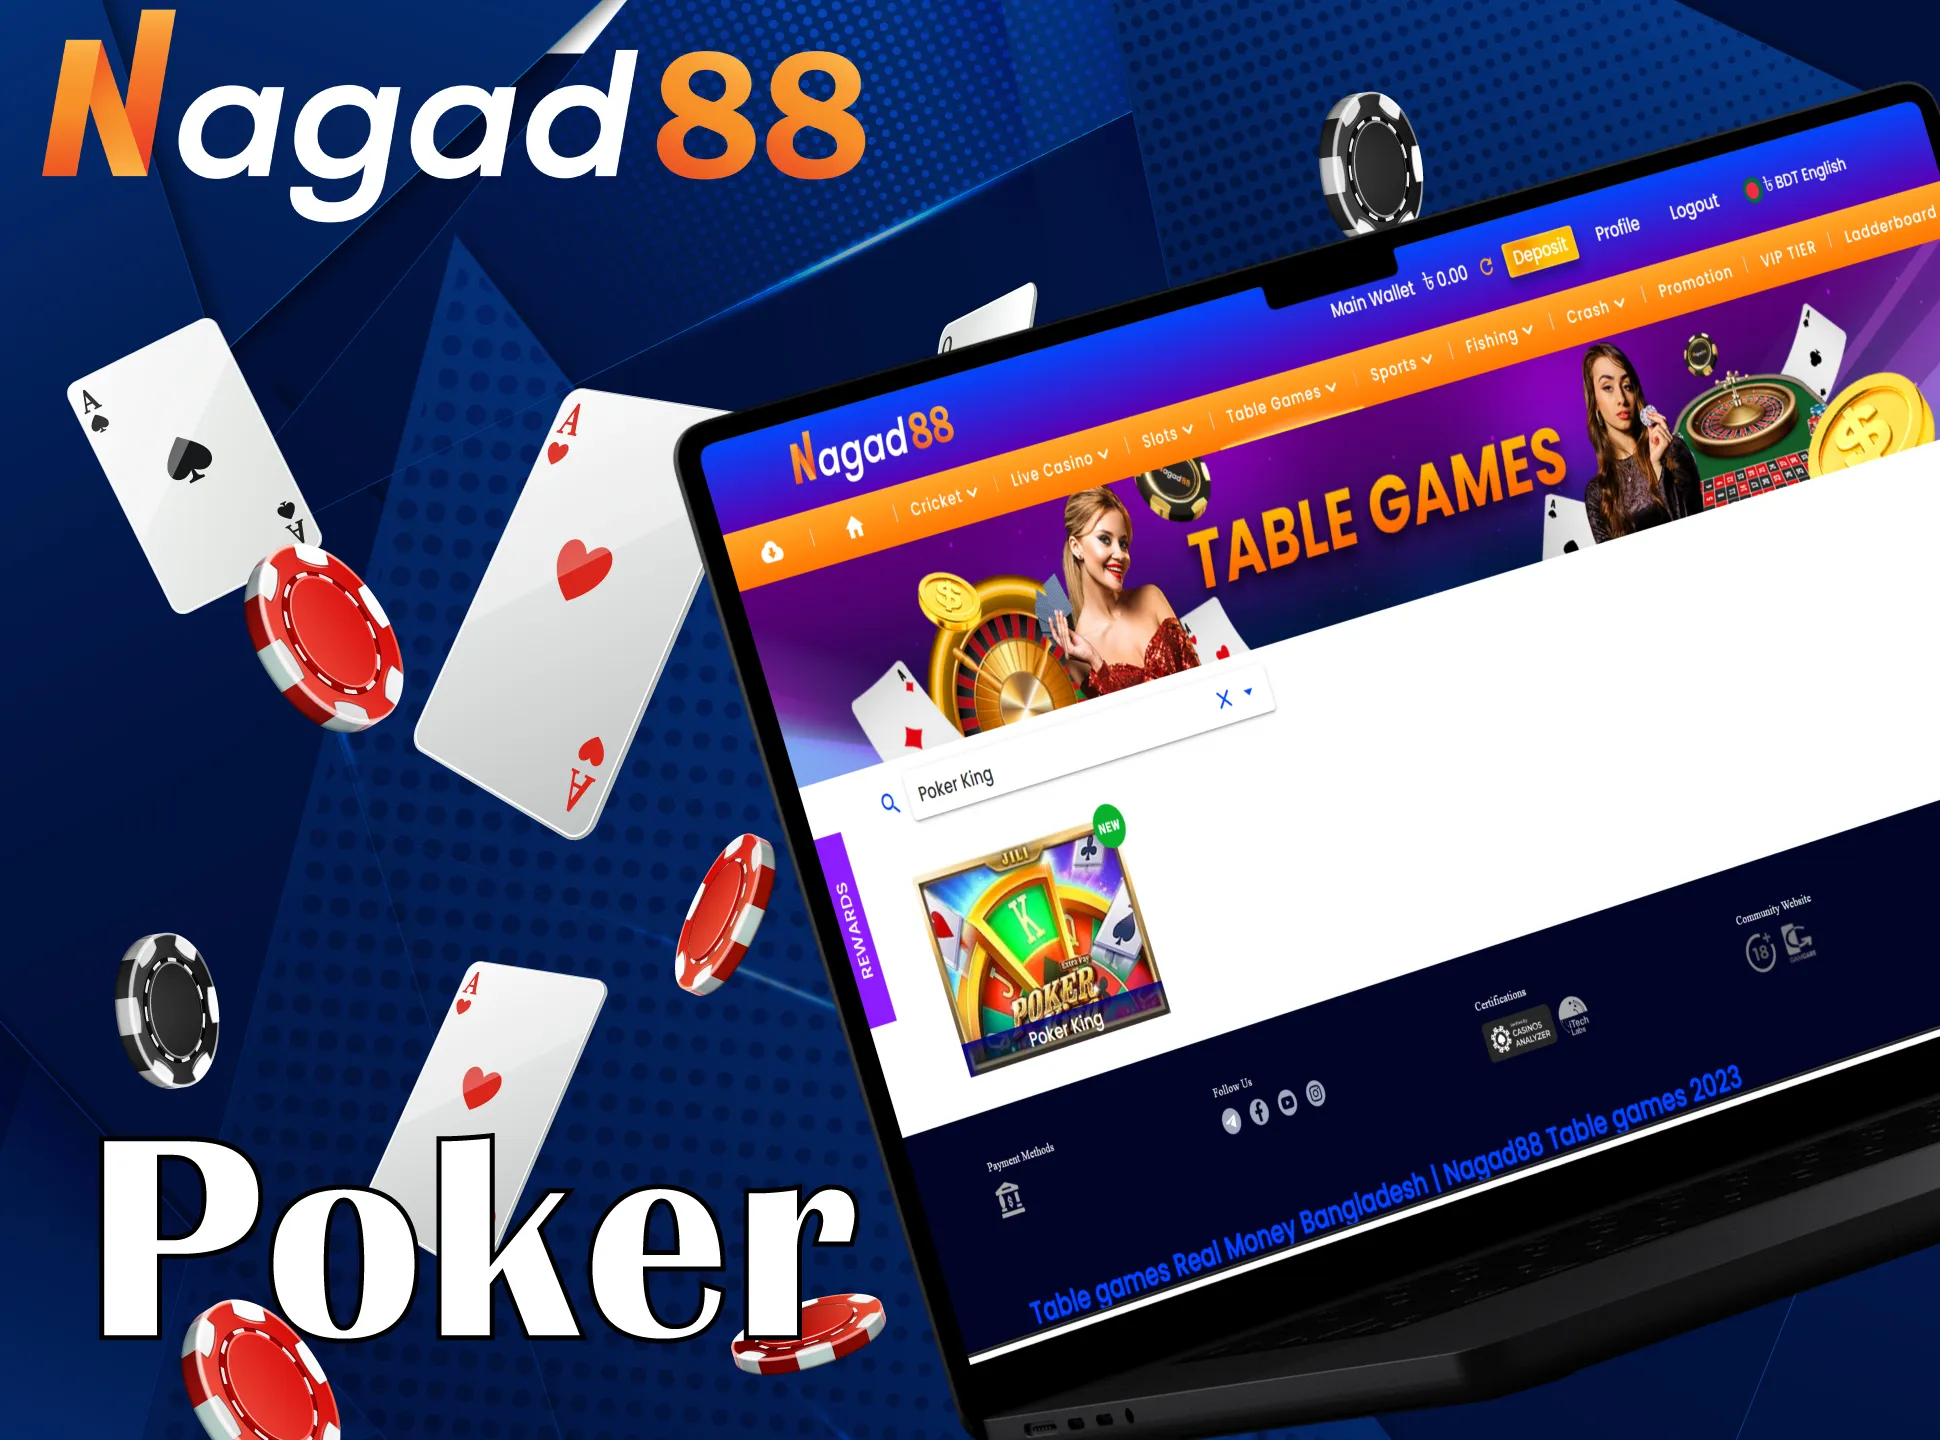 Play poker with Nagad88.